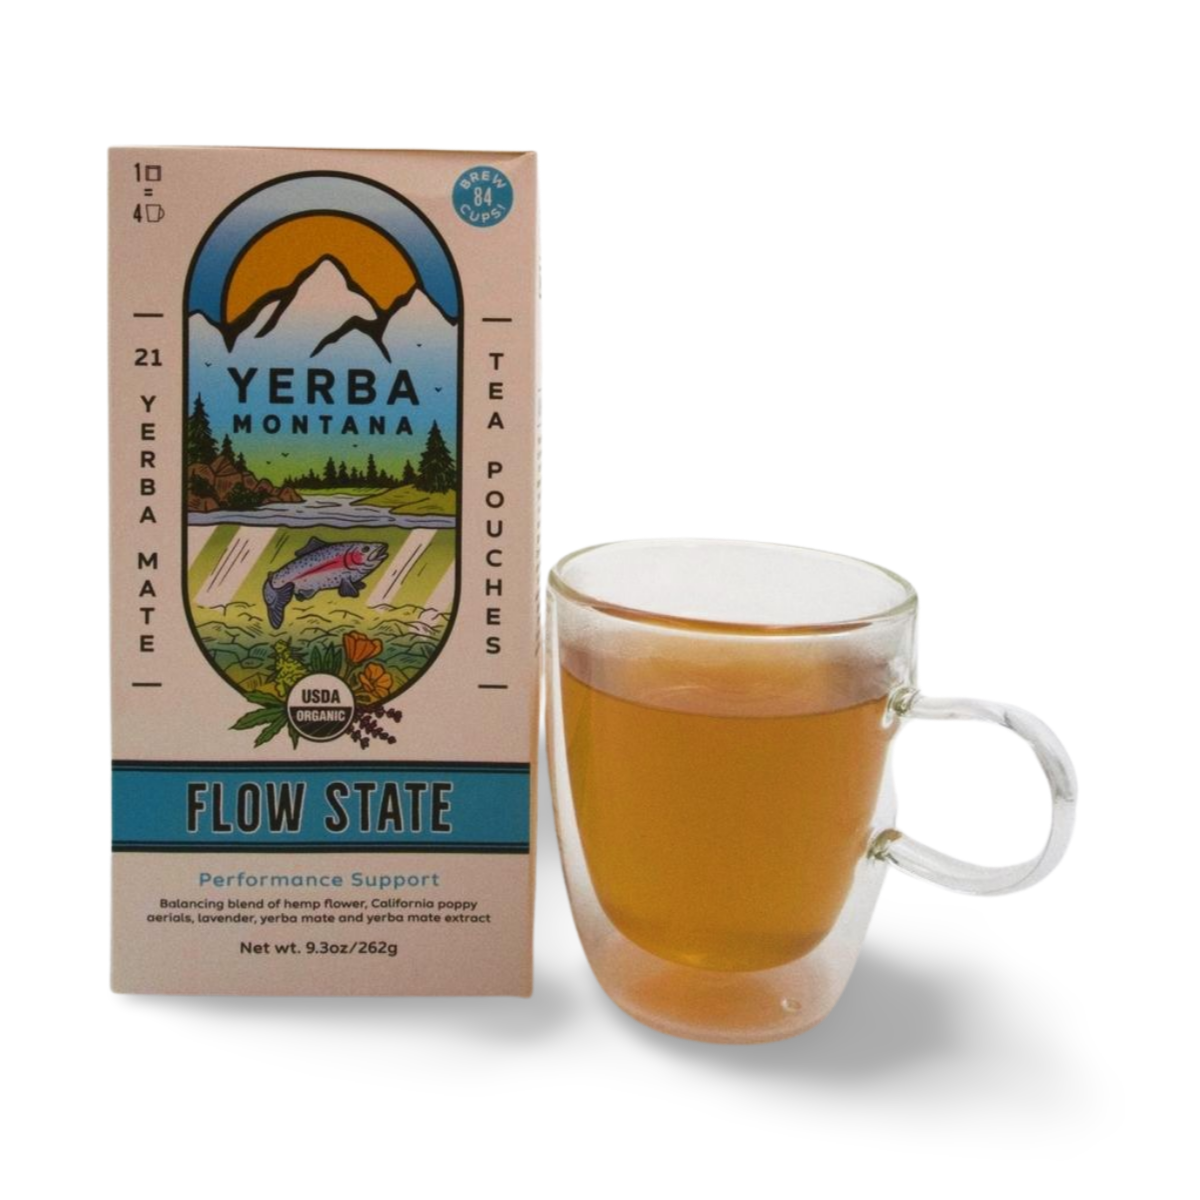 Flow State Yerba Mate tea bags with hemp flower, mullein leaf and marshmallow root